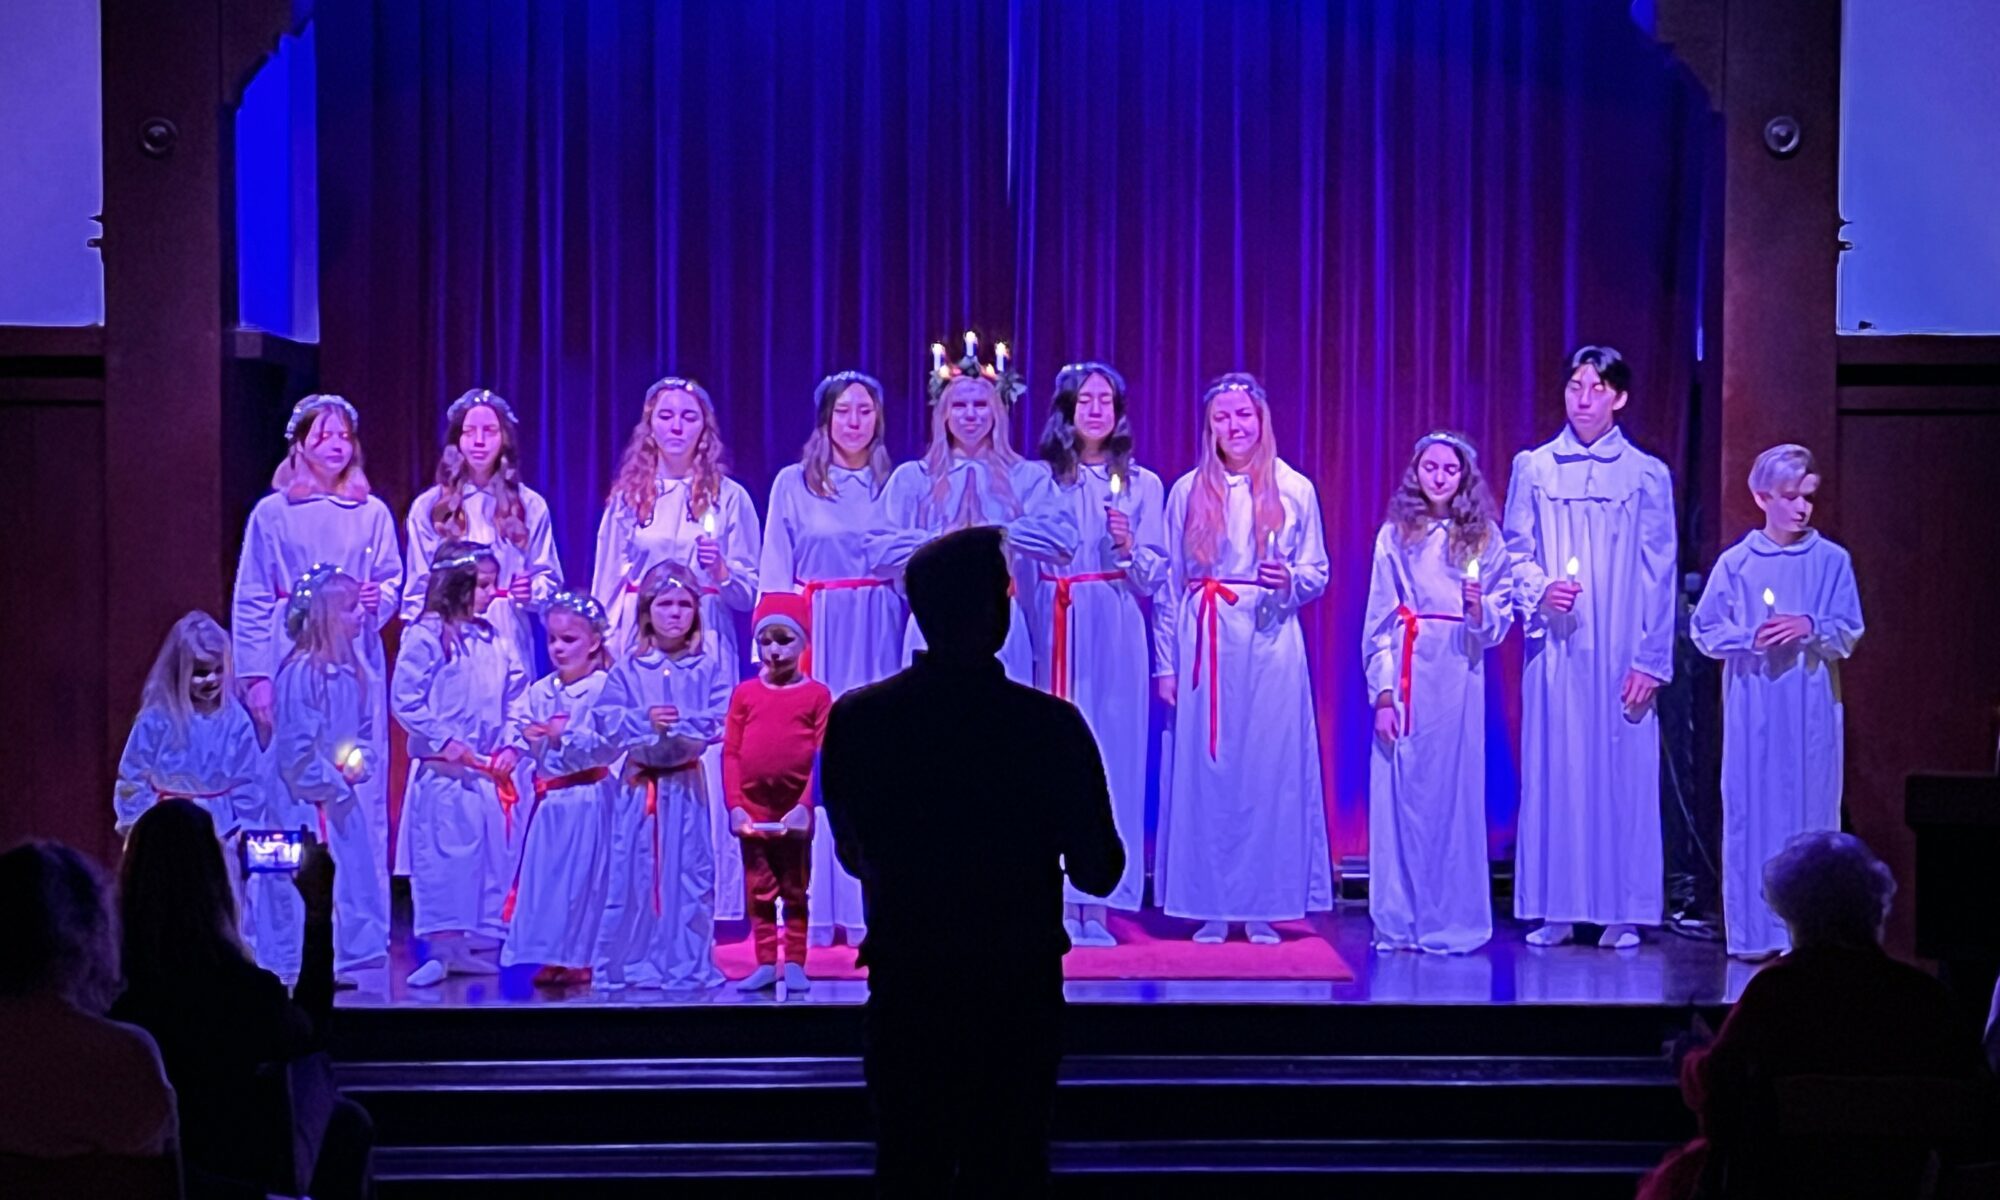 Lucia Choir singing on stage